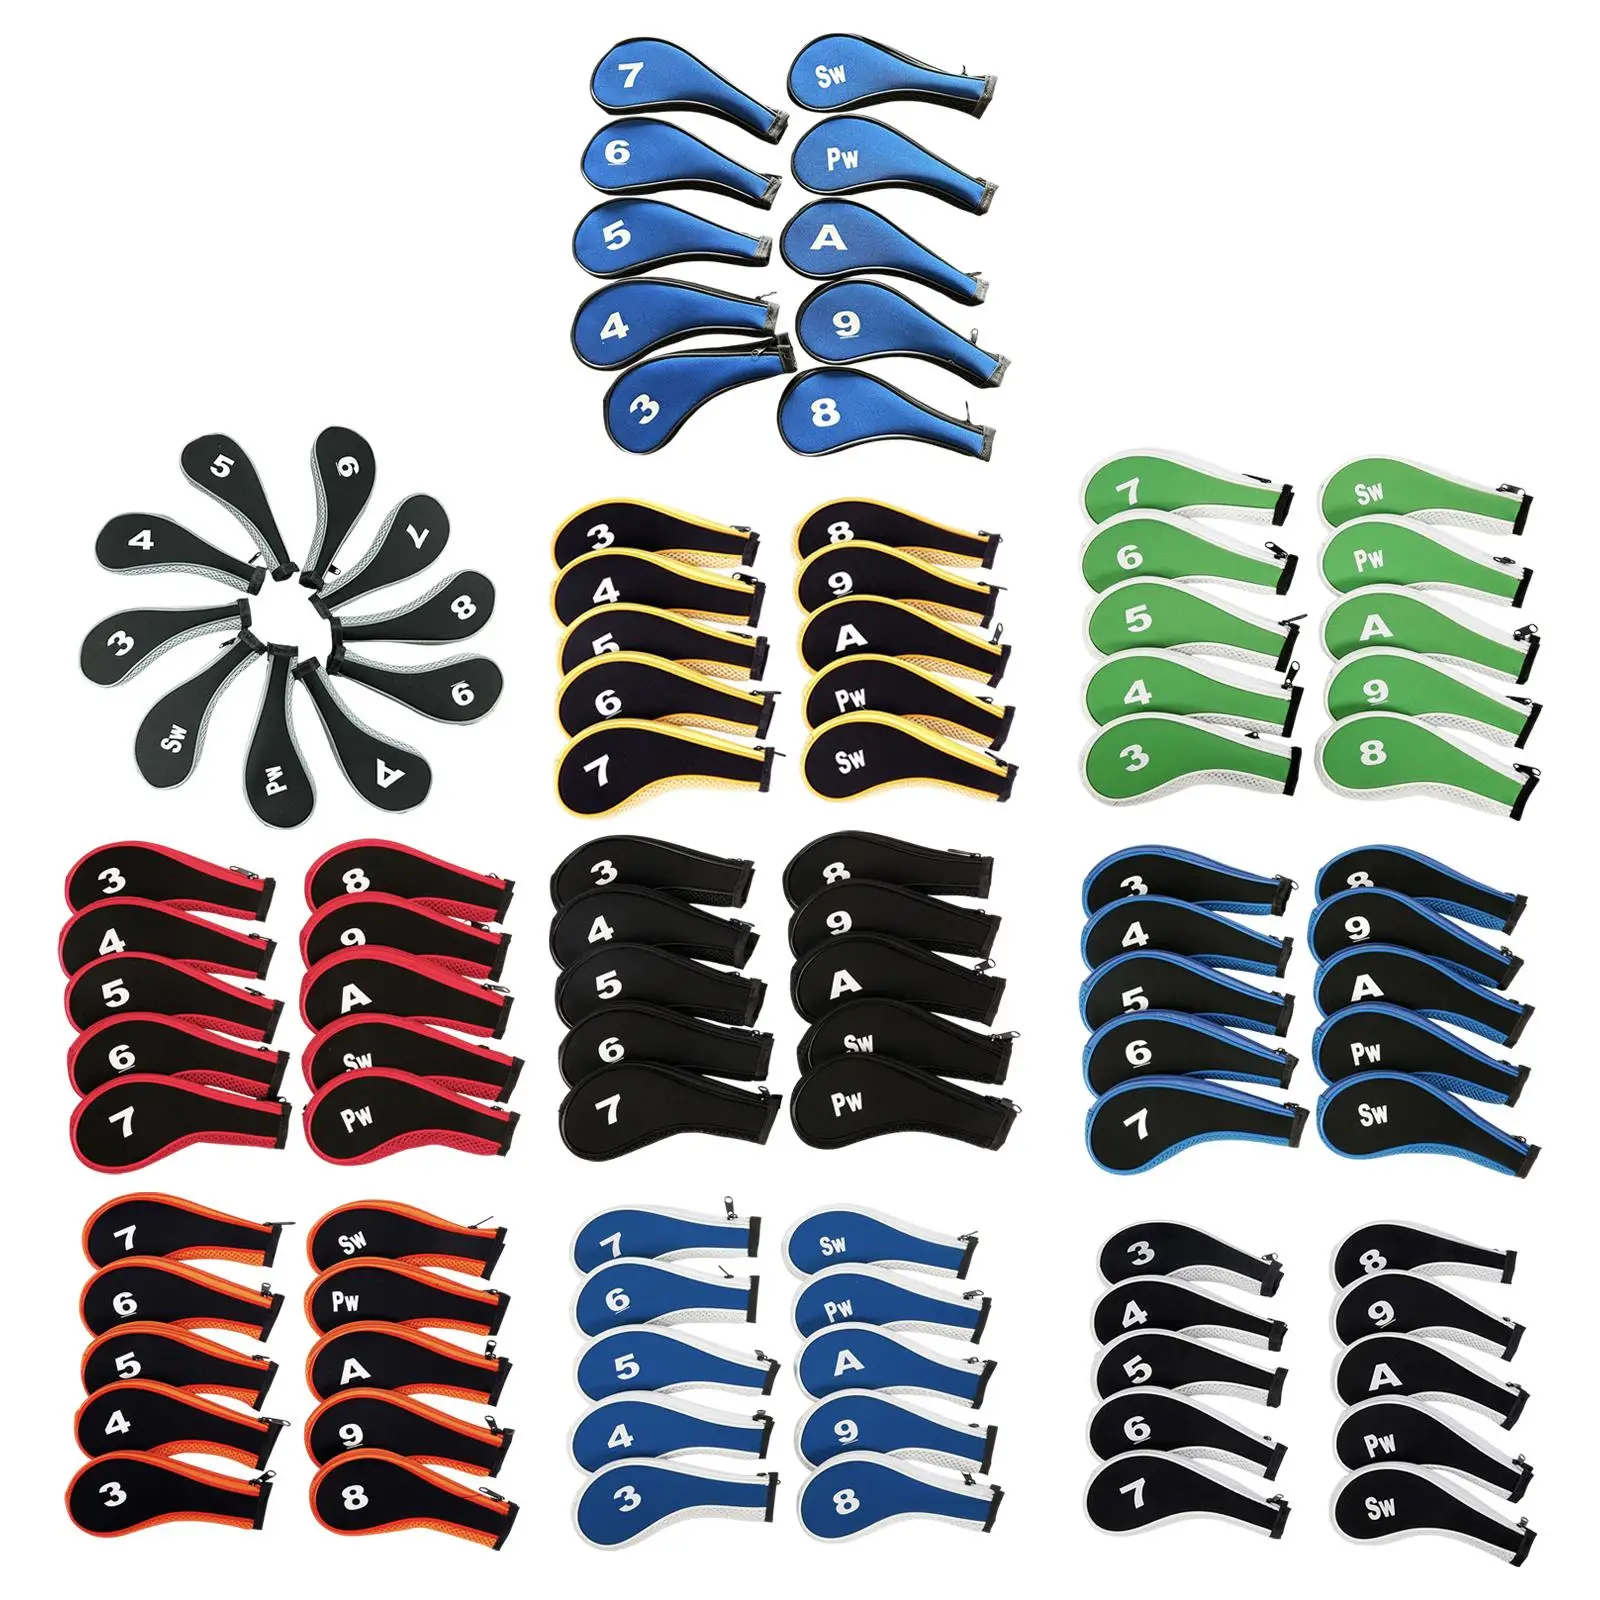 

10x Golf Iron Headcover Set Golf Club Head Cover Putter Sleeve for Training Equipment